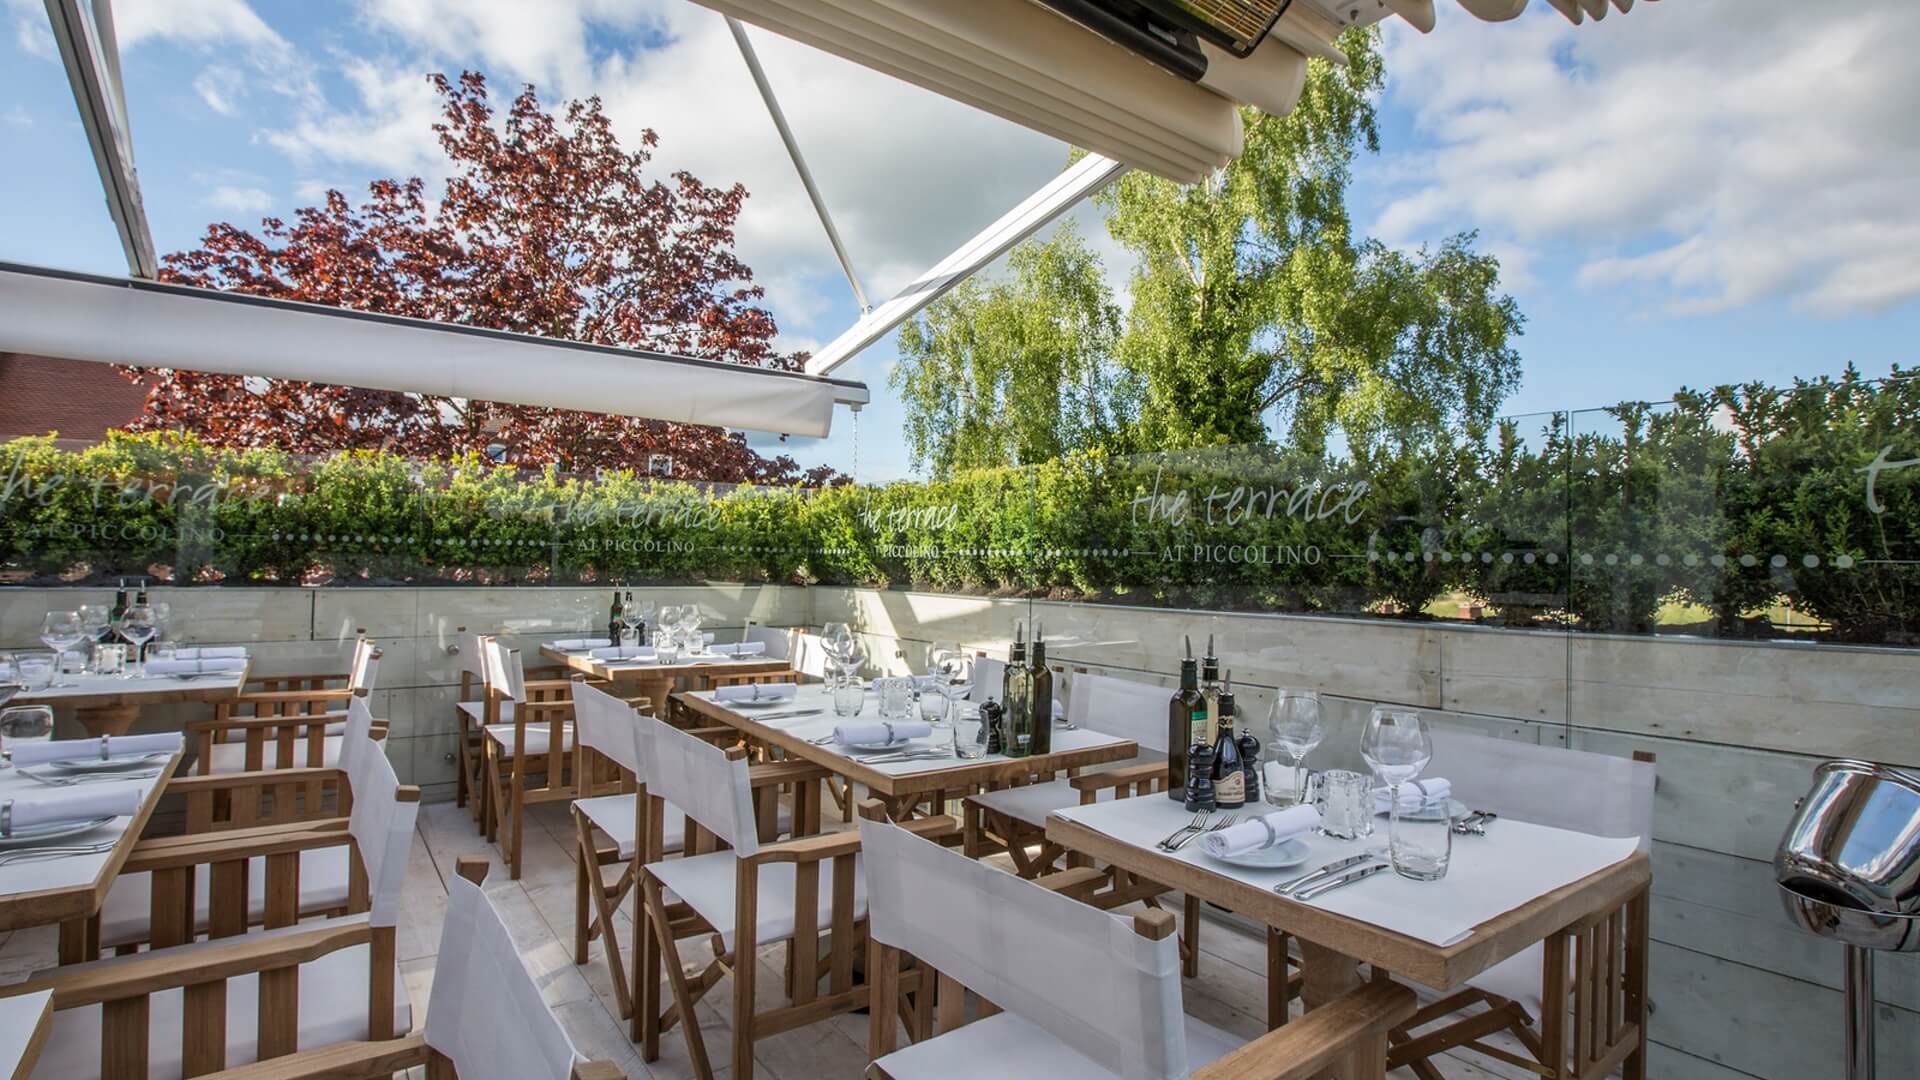 Piccolinos outdoor terrace in Knutsford.